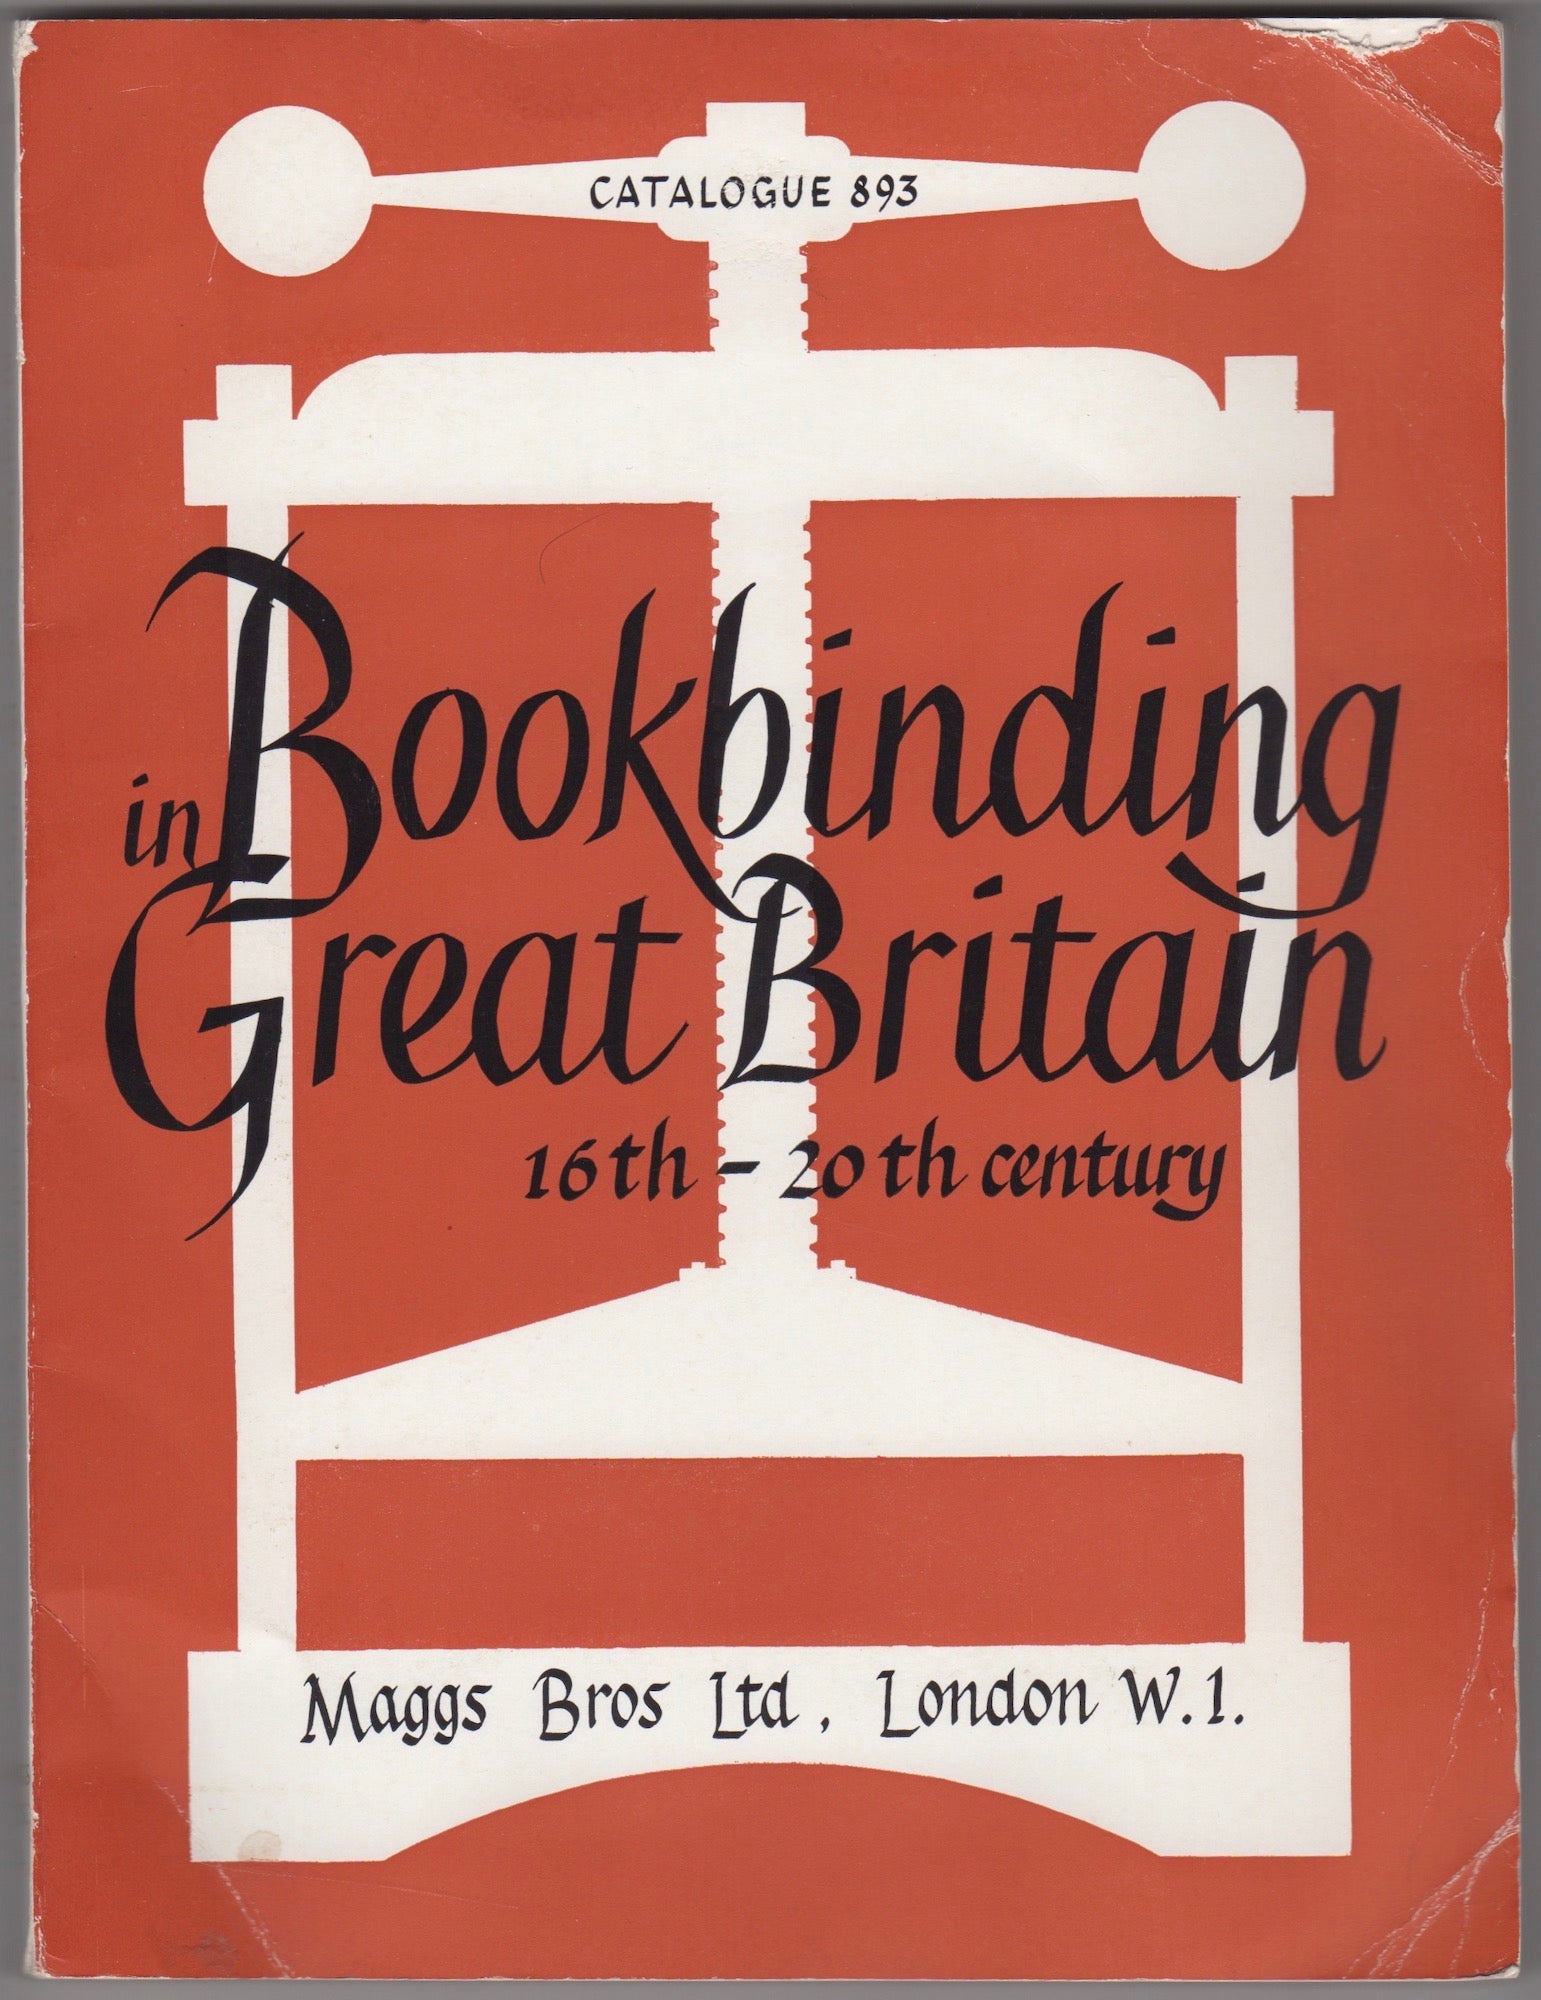 Maggs Bros - Catalogue 893: Bookbinding in Great Britain Sixteenth to the Twentieth Century